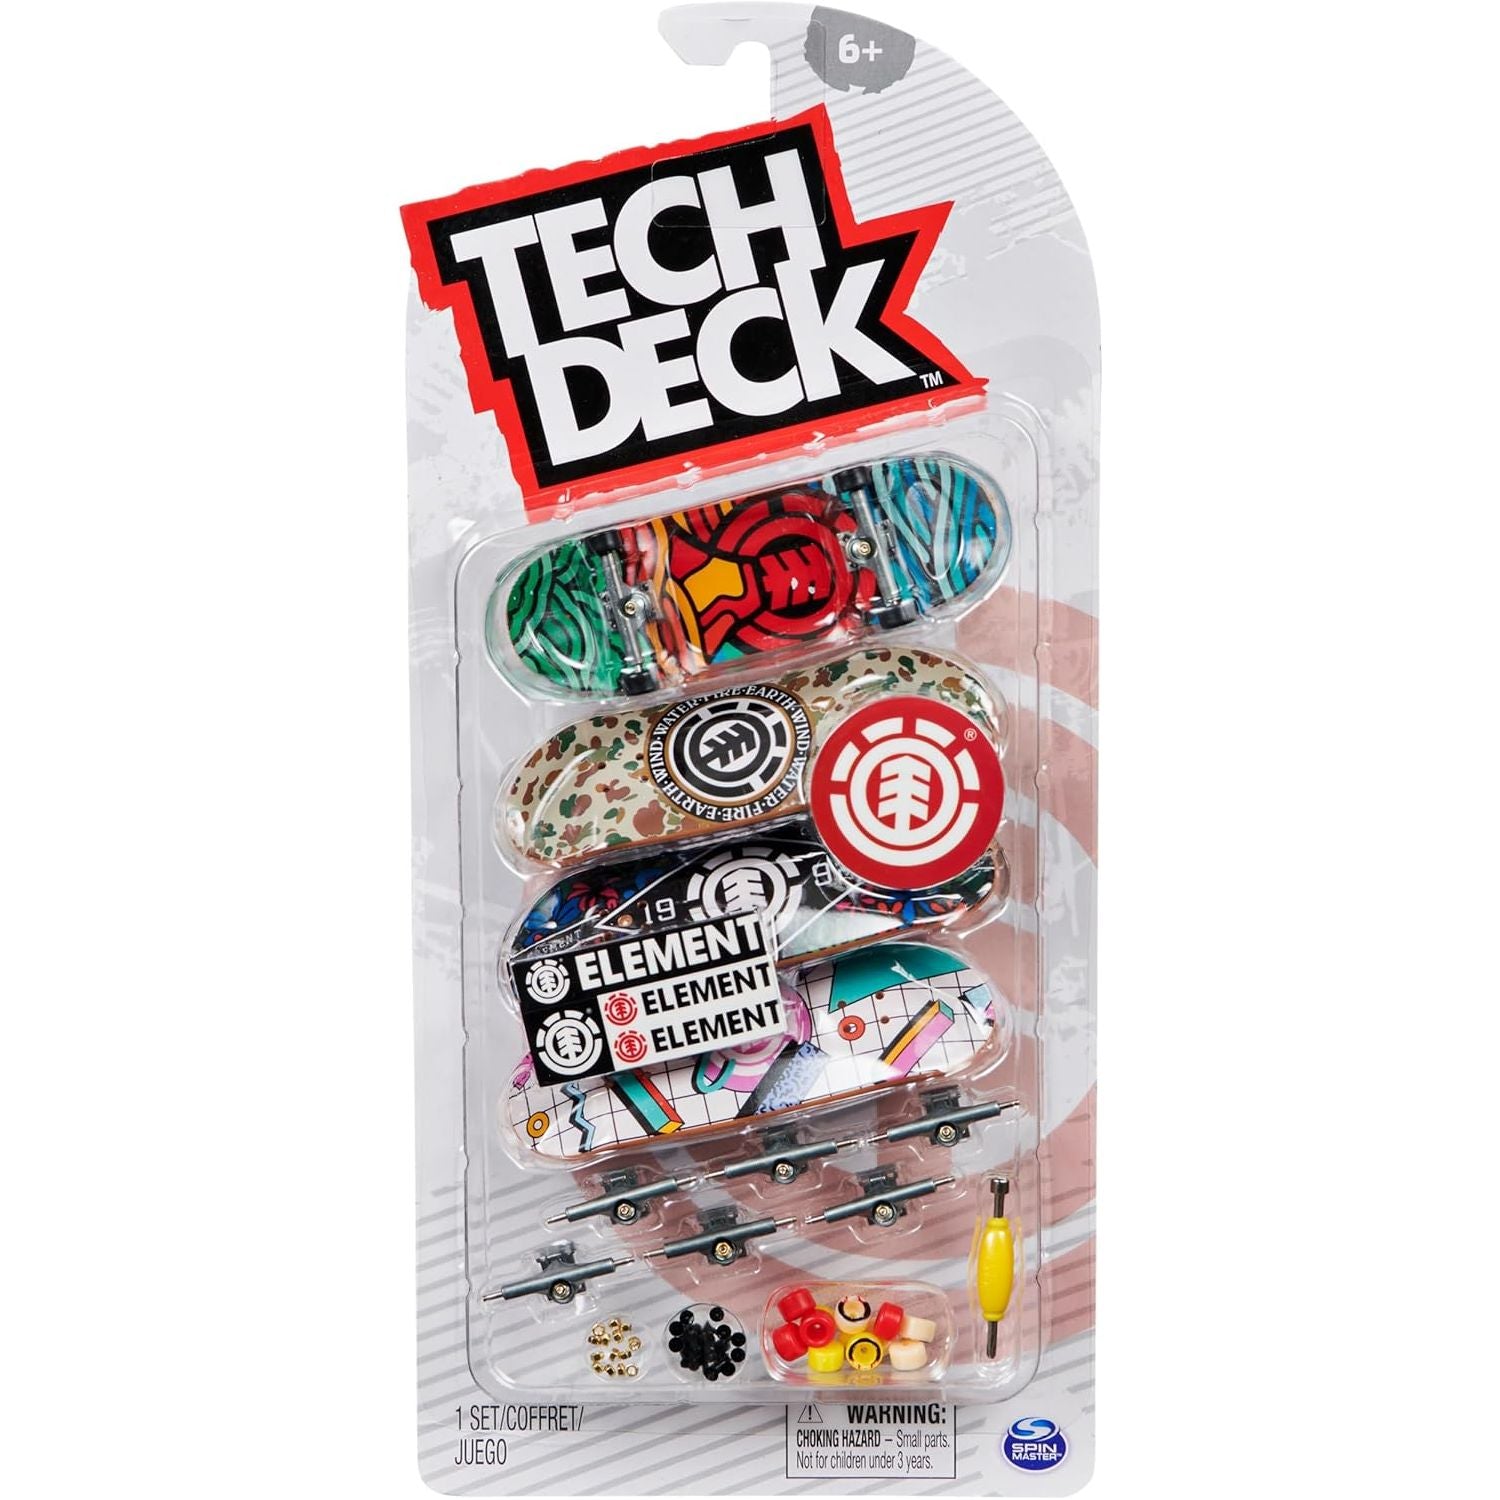 Tech Deck, Ultra DLX Fingerboard 4-Pack, Element Skateboards, Collectible and Customizable Mini Skateboards